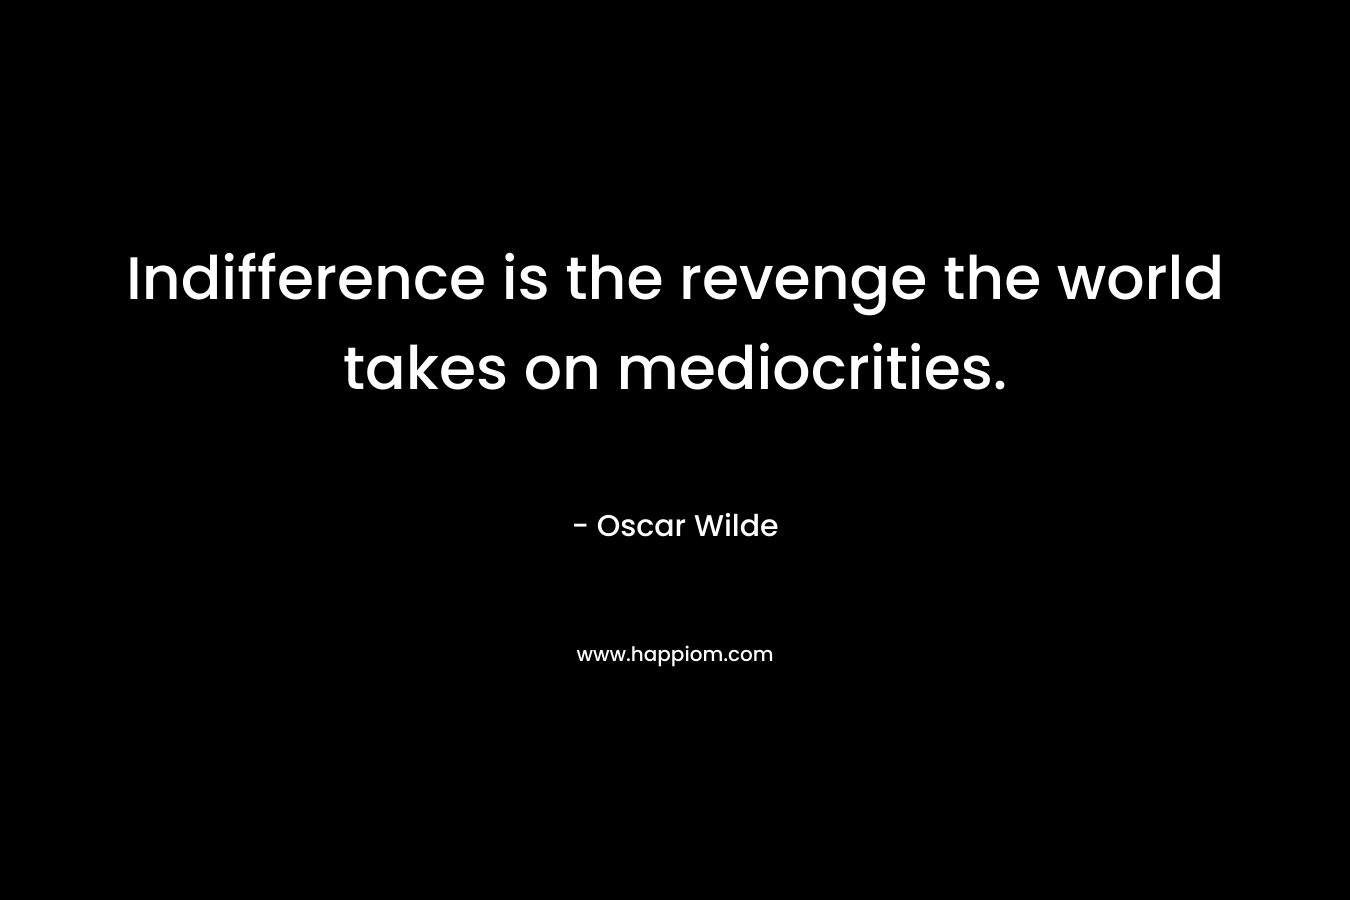 Indifference is the revenge the world takes on mediocrities. – Oscar Wilde